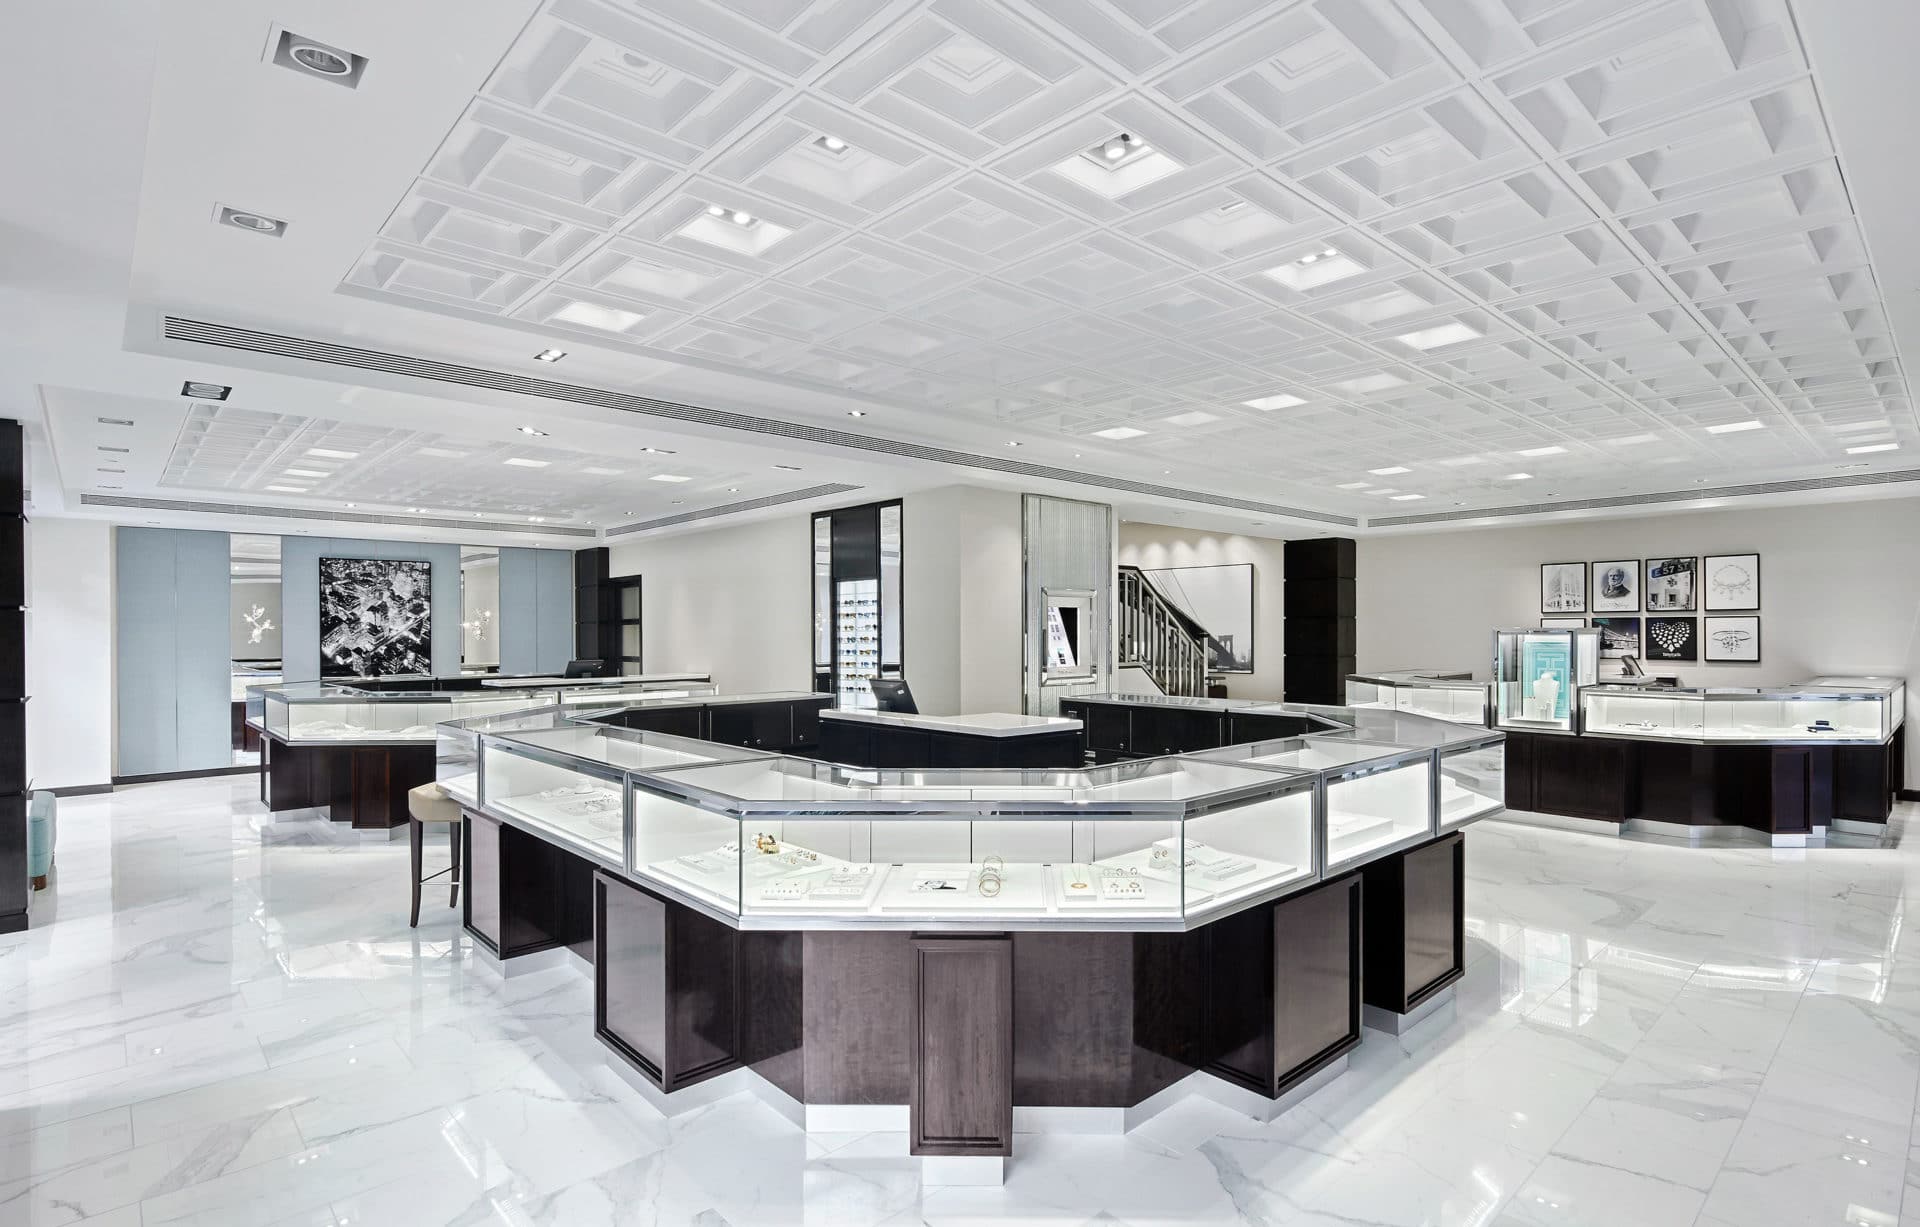 Portview completes refurbished Tiffany & Co. in fashionable Chelsea